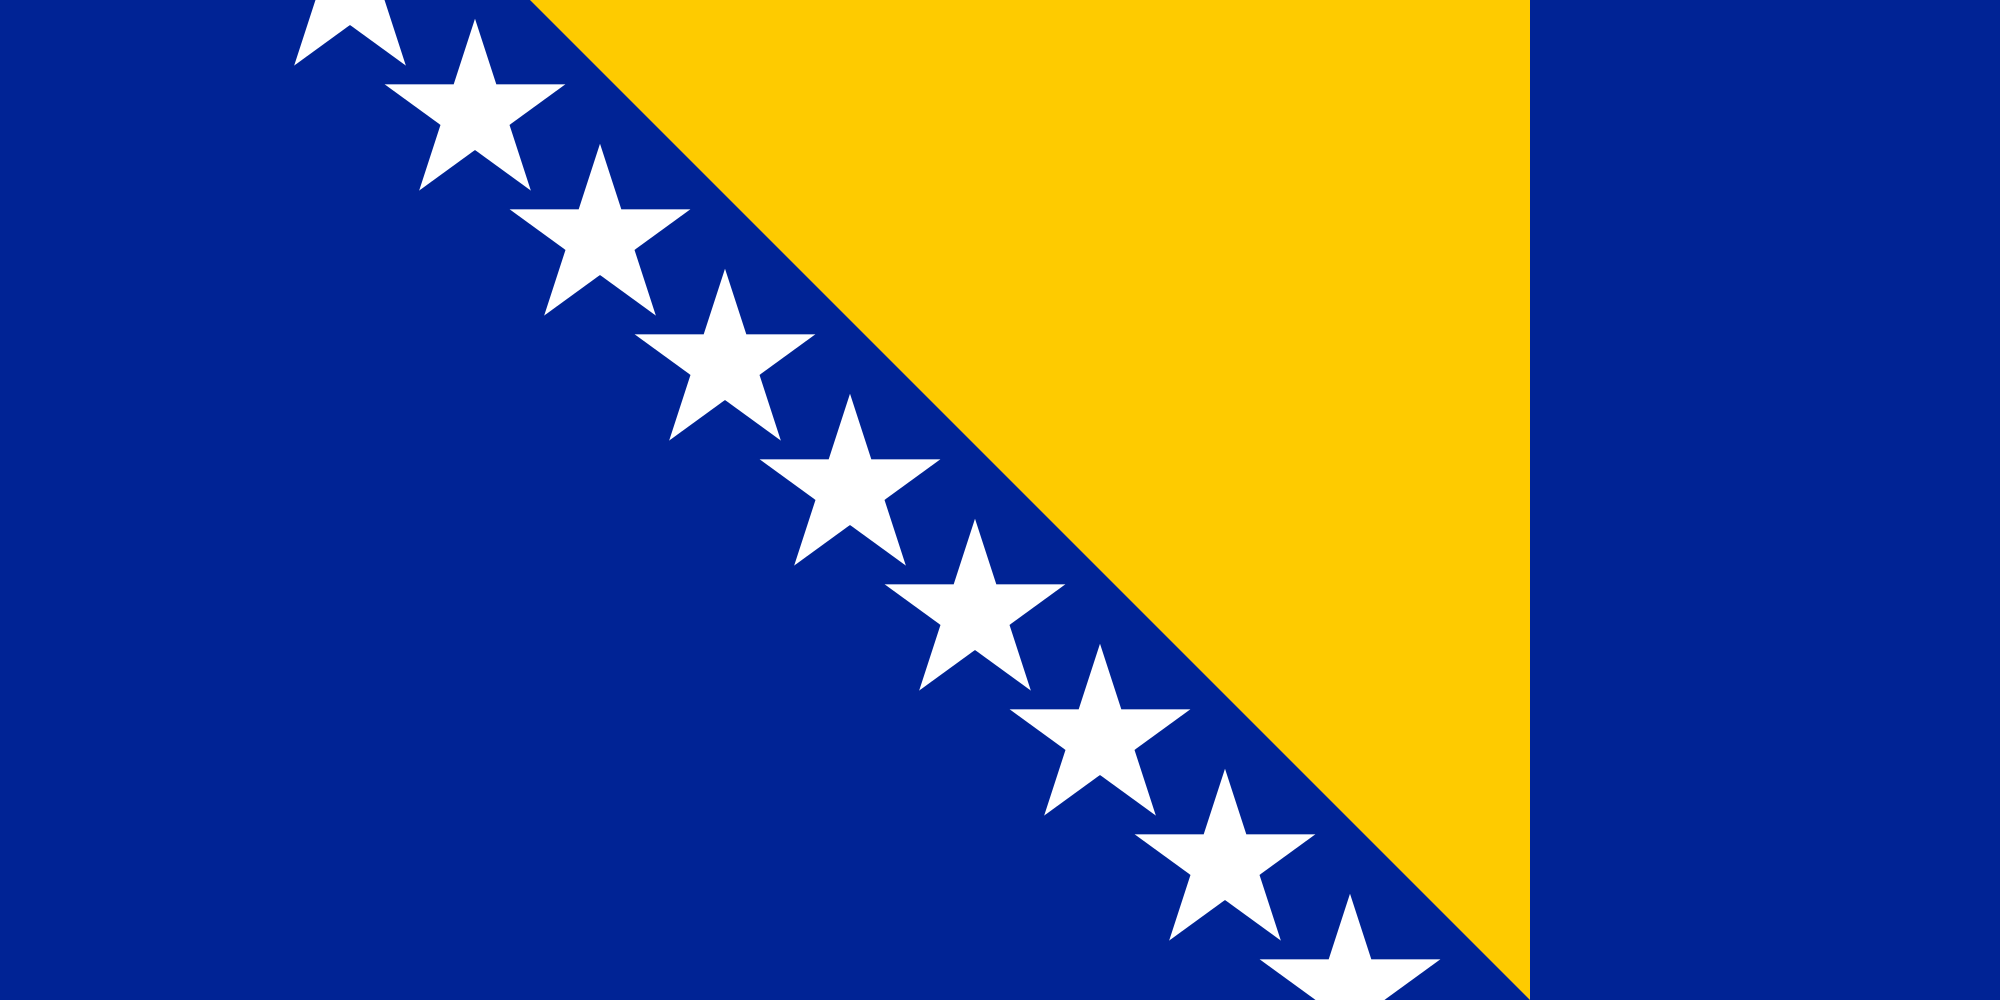 flag-of-bosnia-and-herzegovina-rankflags-collection-of-flags